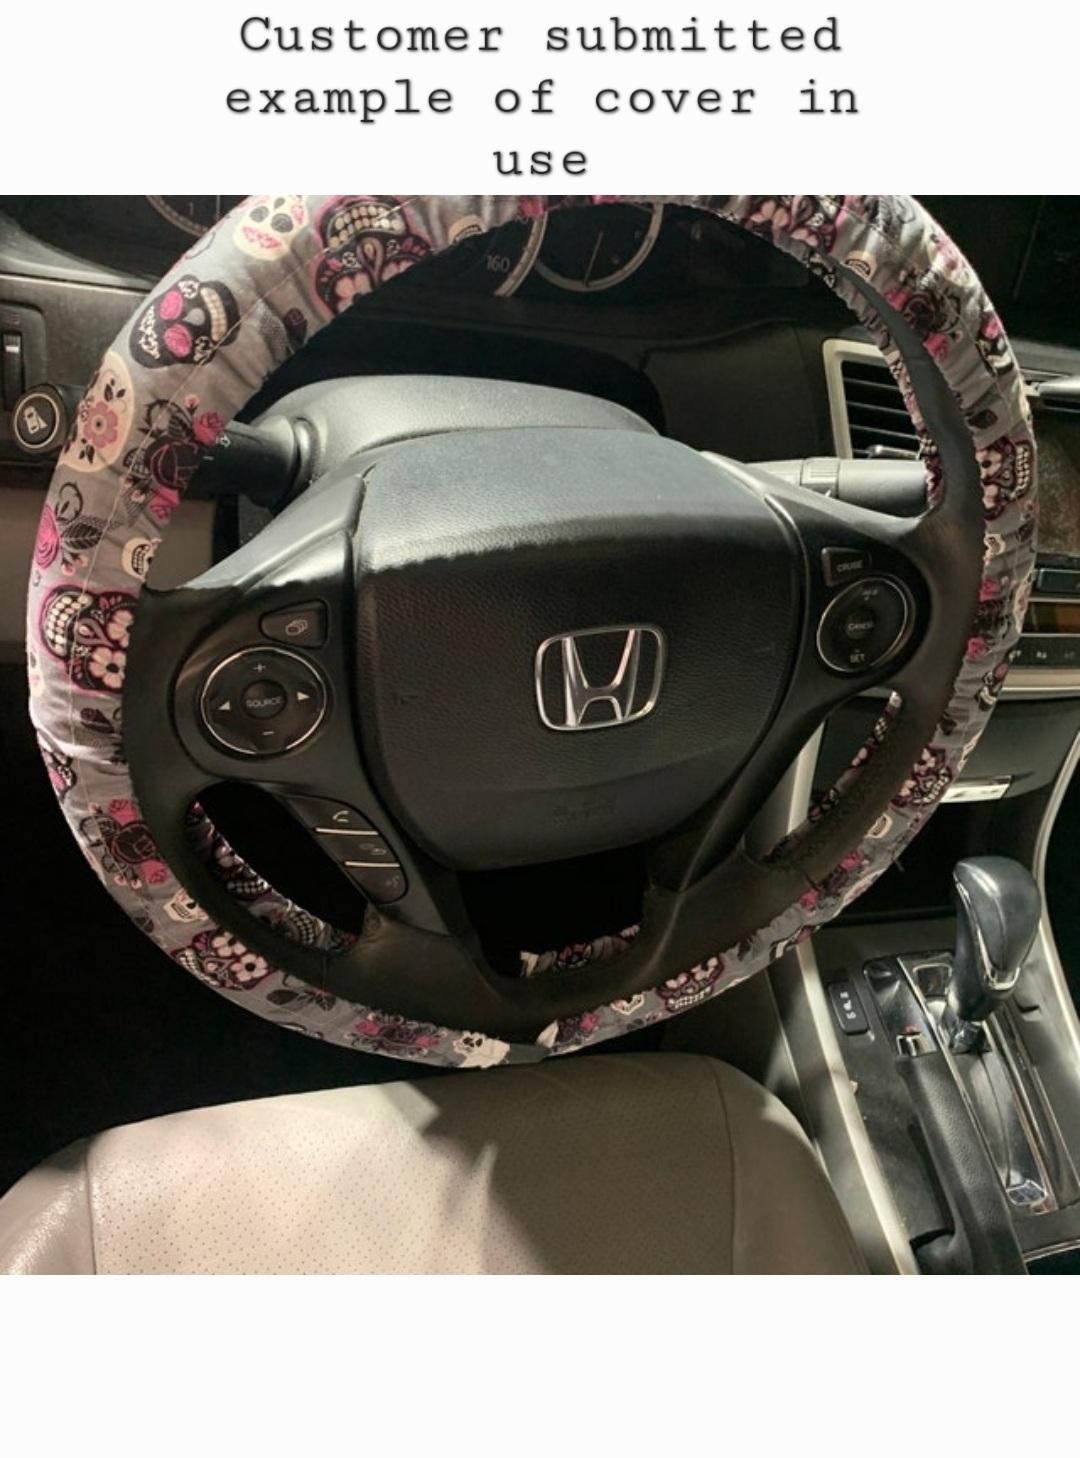 Beauty Princess Steering Wheel Cover made with Licensed Disney Fabric, Handmade - Harlow's Store and Garden Gifts